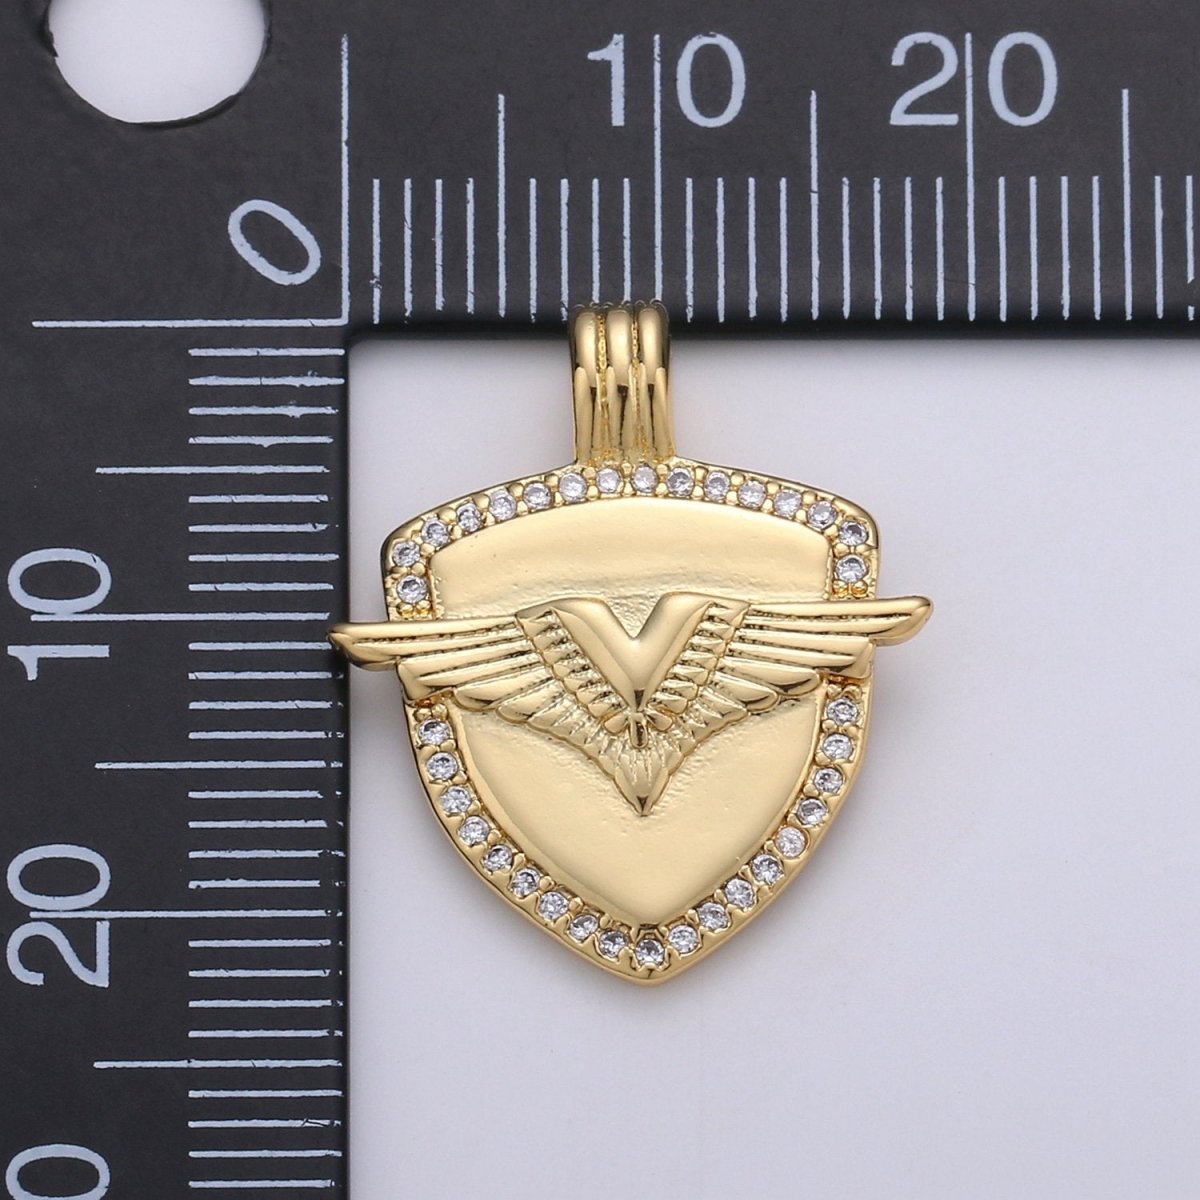 Dainty 14k Gold Filled Shield Charm, Cz Shield pendant, Micro Pave Wing Pendant Protection Jewelry Supply I-930 - DLUXCA